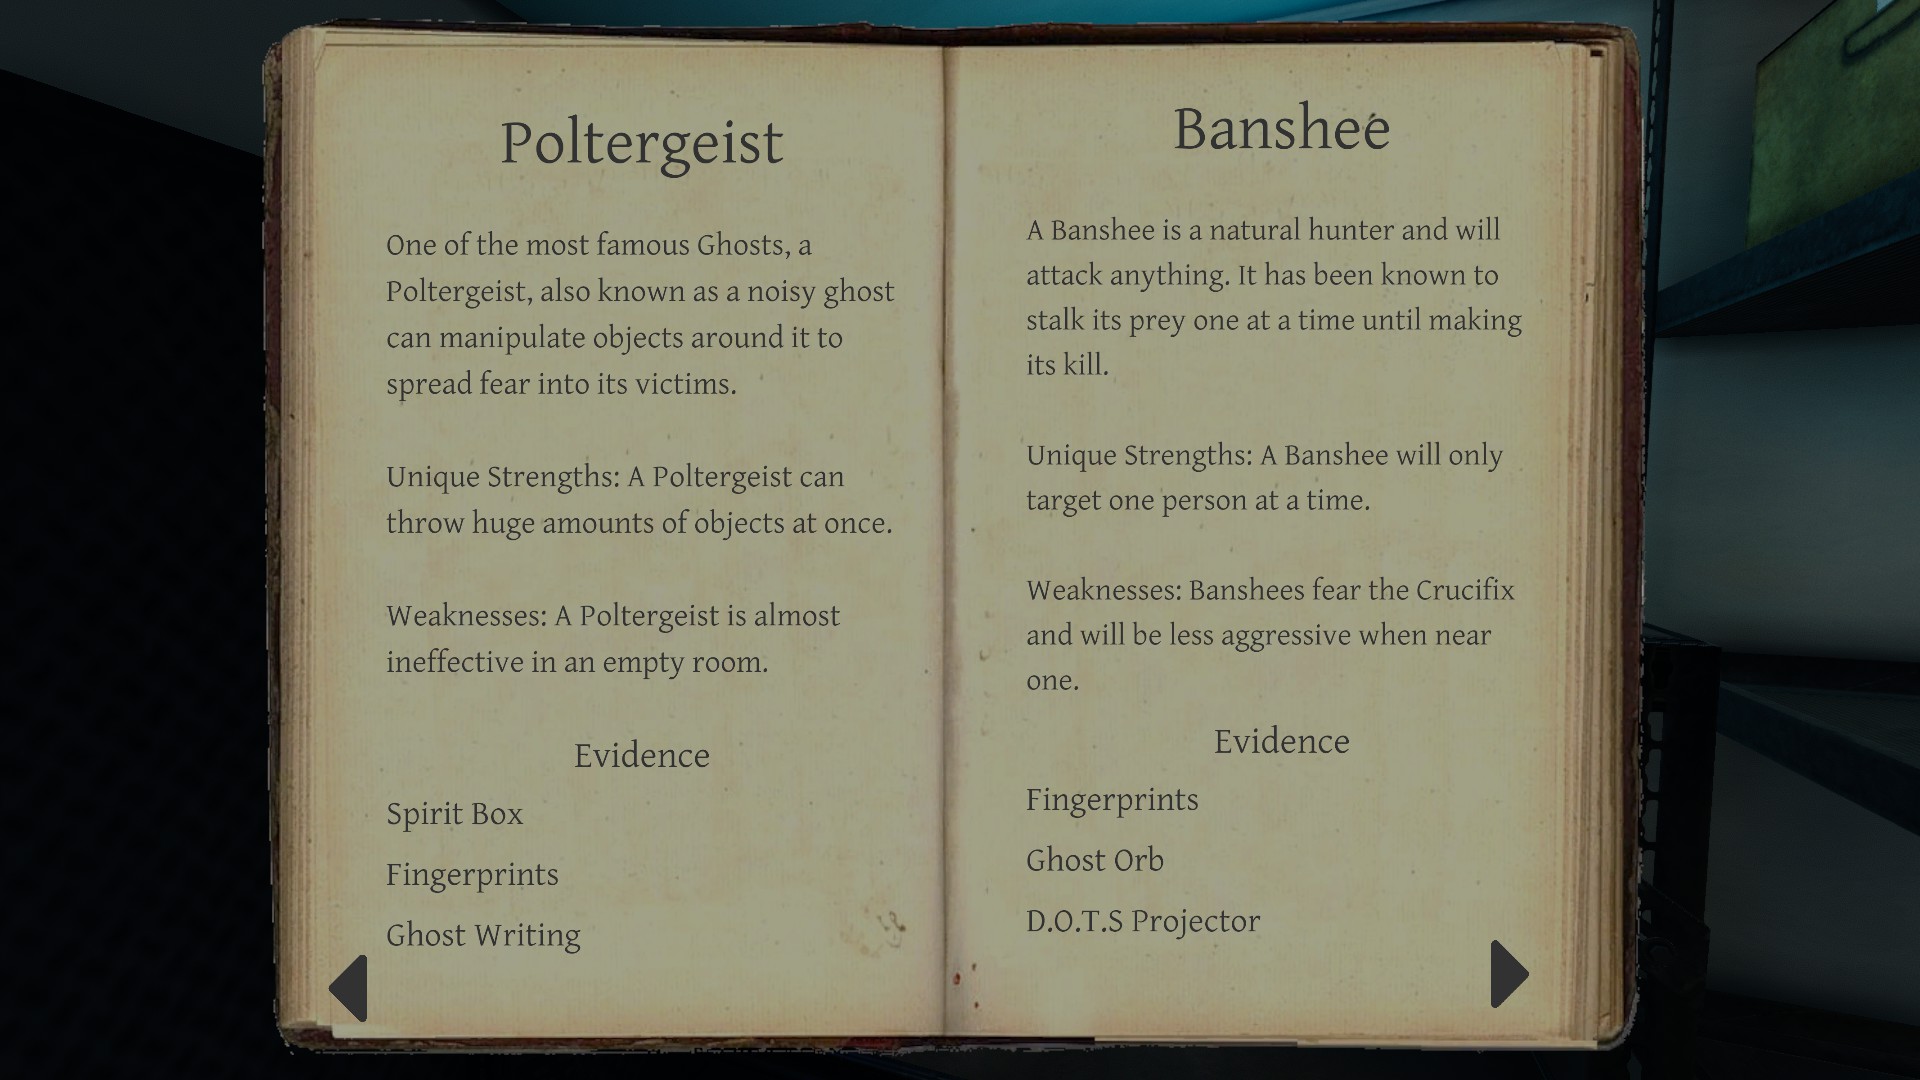 Phasmophobia List of New Ghosts in Game - All Evidence and Questions for Ghost Guide - Poltergeist - Banshee - C8172F2